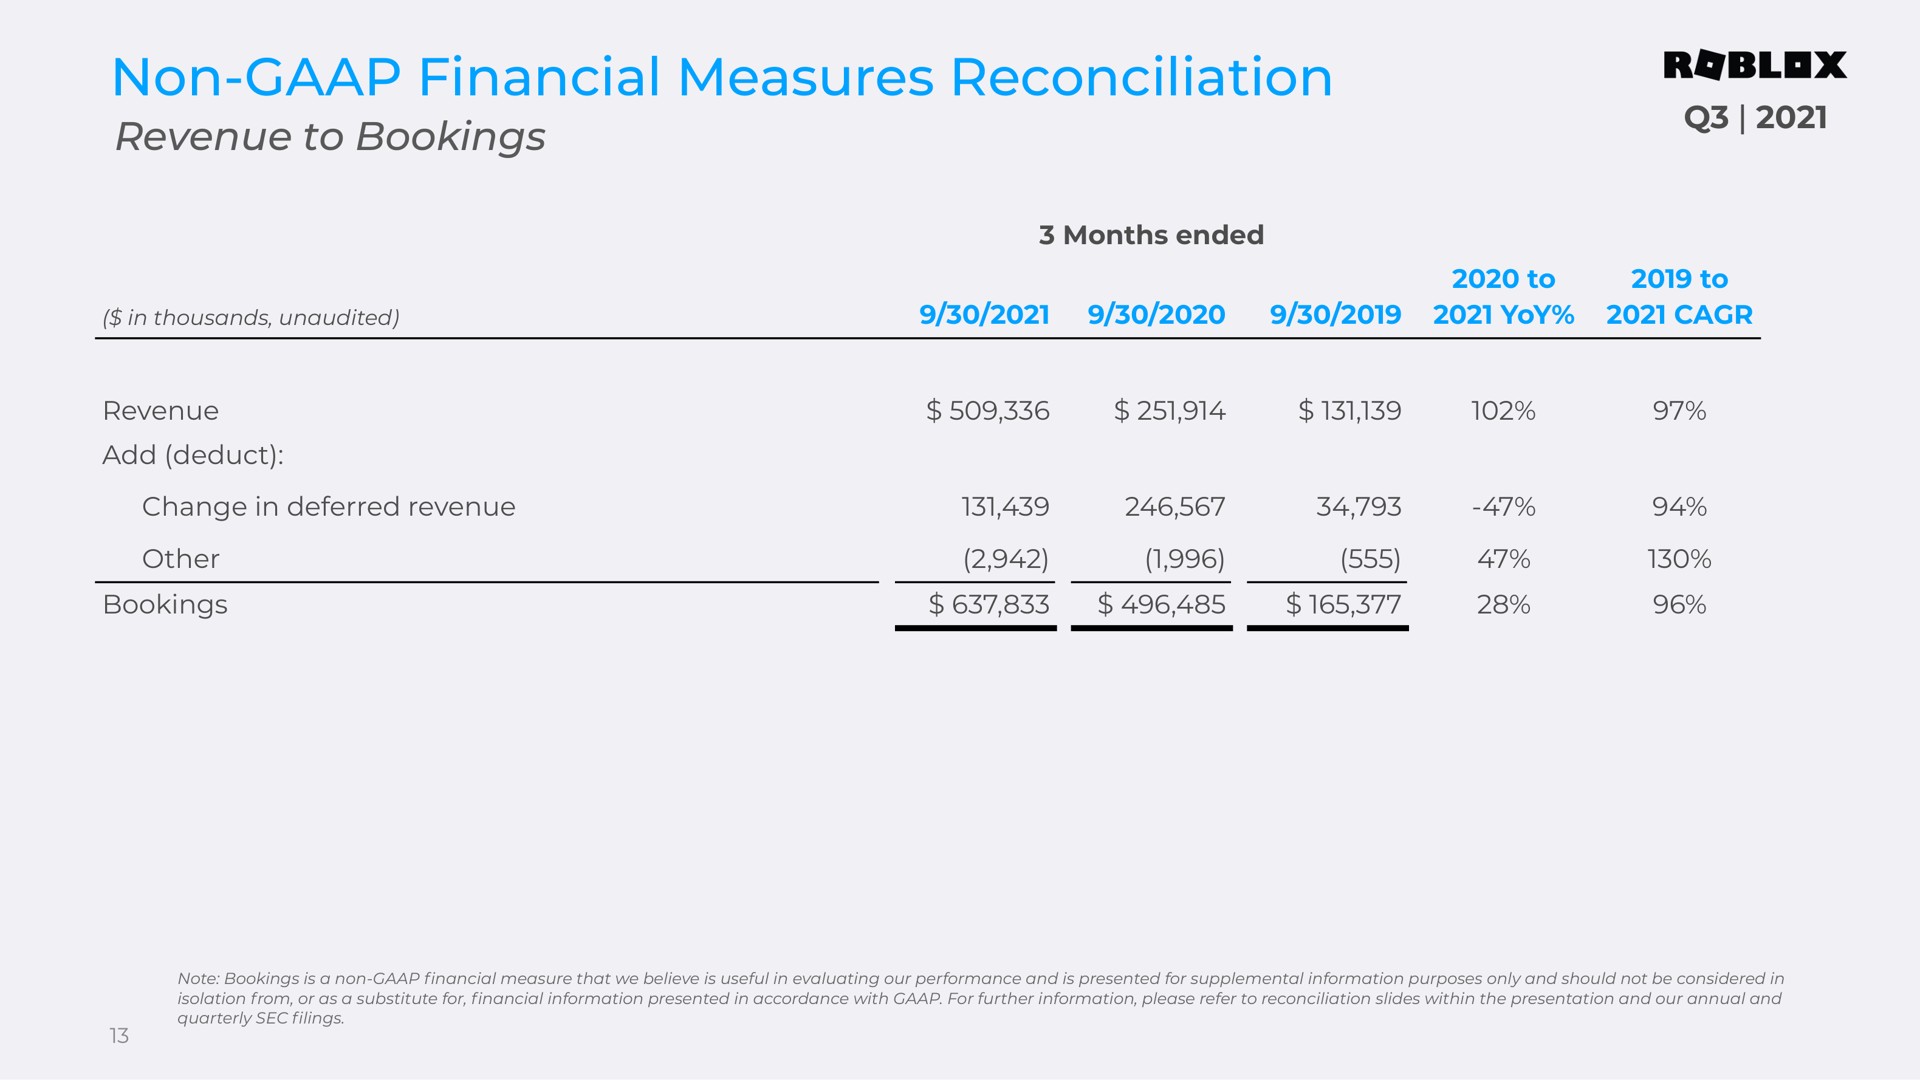 non financial measures reconciliation revenue to bookings reviewed updated | Roblox